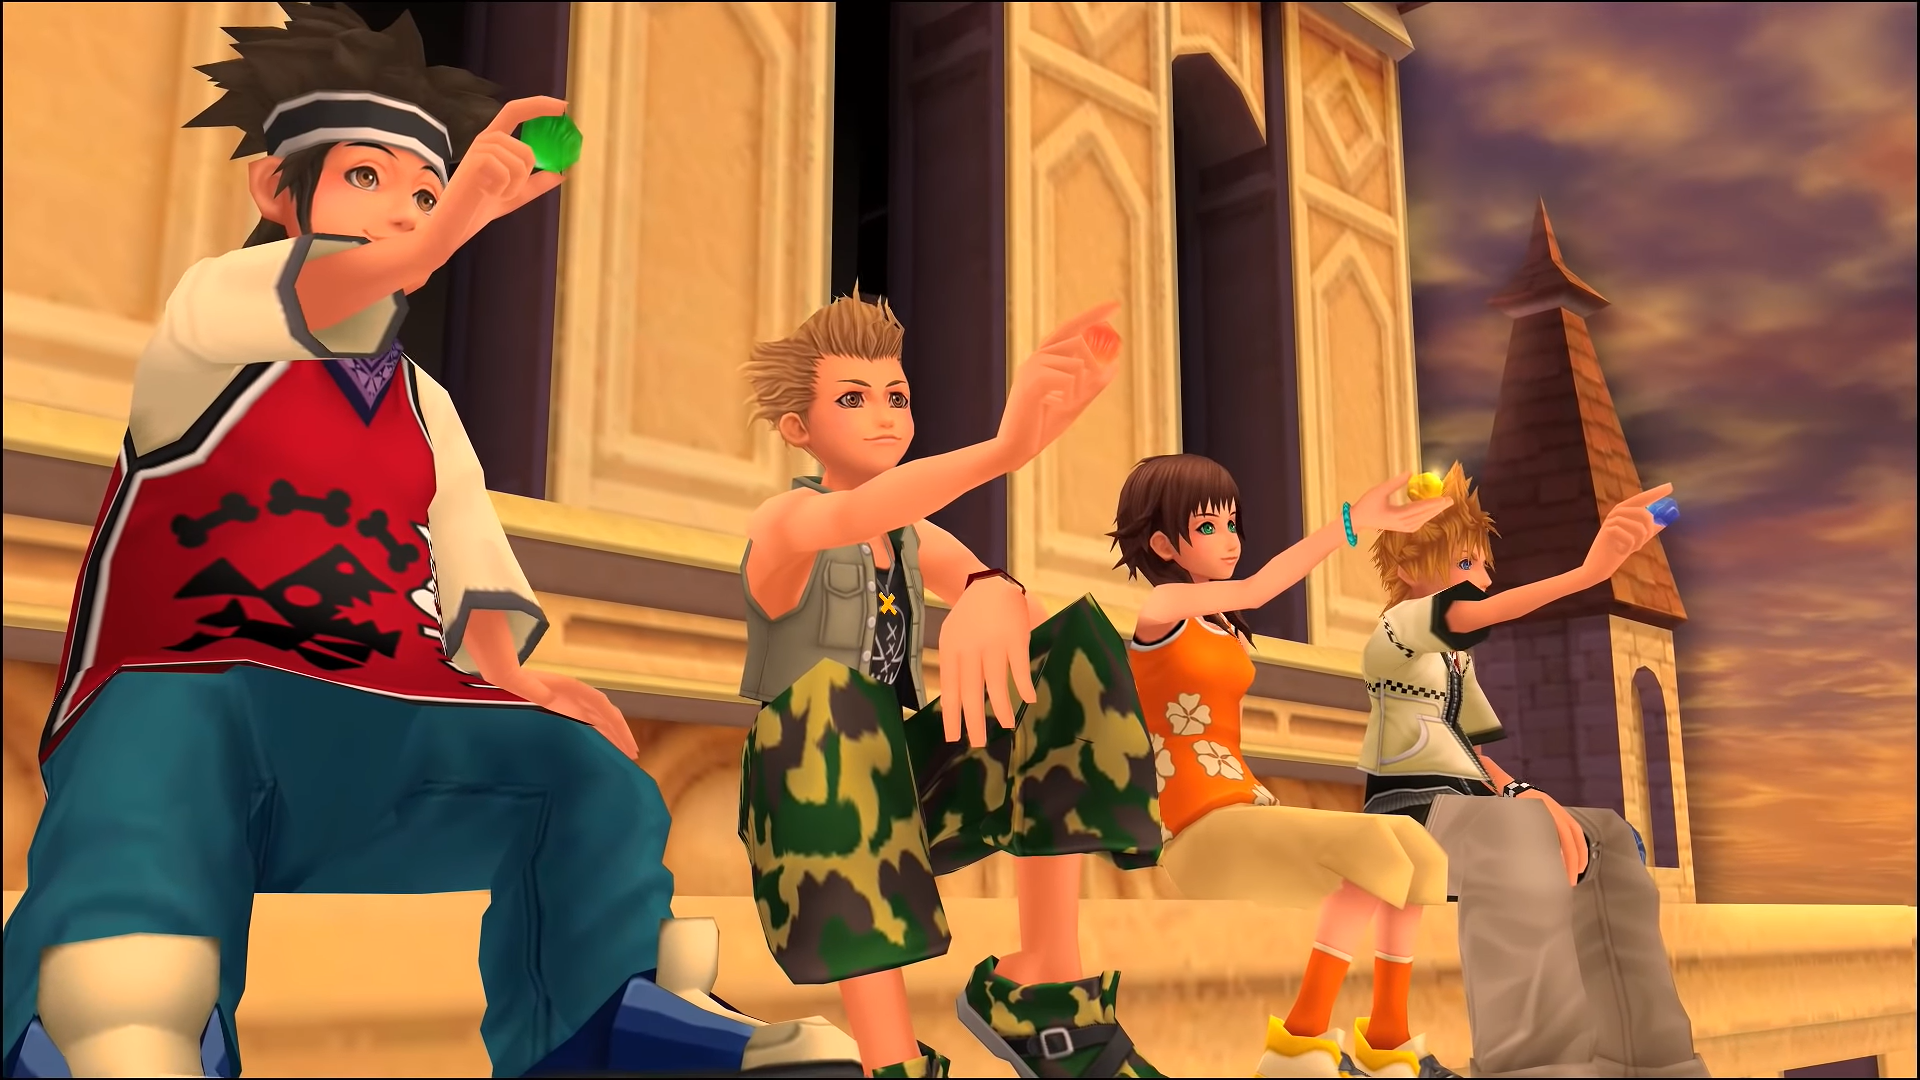 "kingdom Hearts II". 2007. Square Enix. Hayner, Pence, Olette, and Roxas sit atop the clock tower, holding up their crystals.